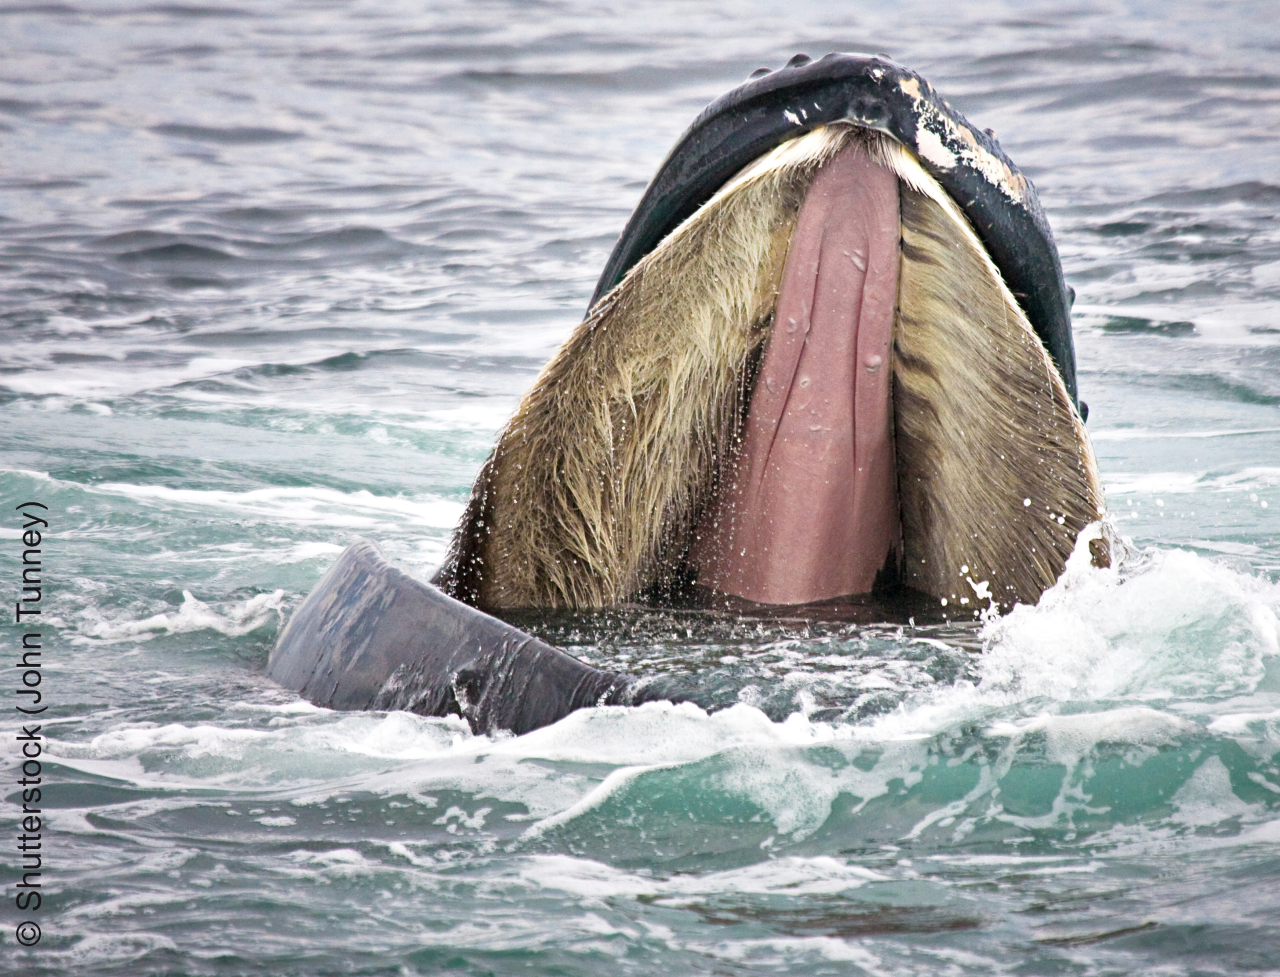 Humpback Whale opens mouth wide to show baleen